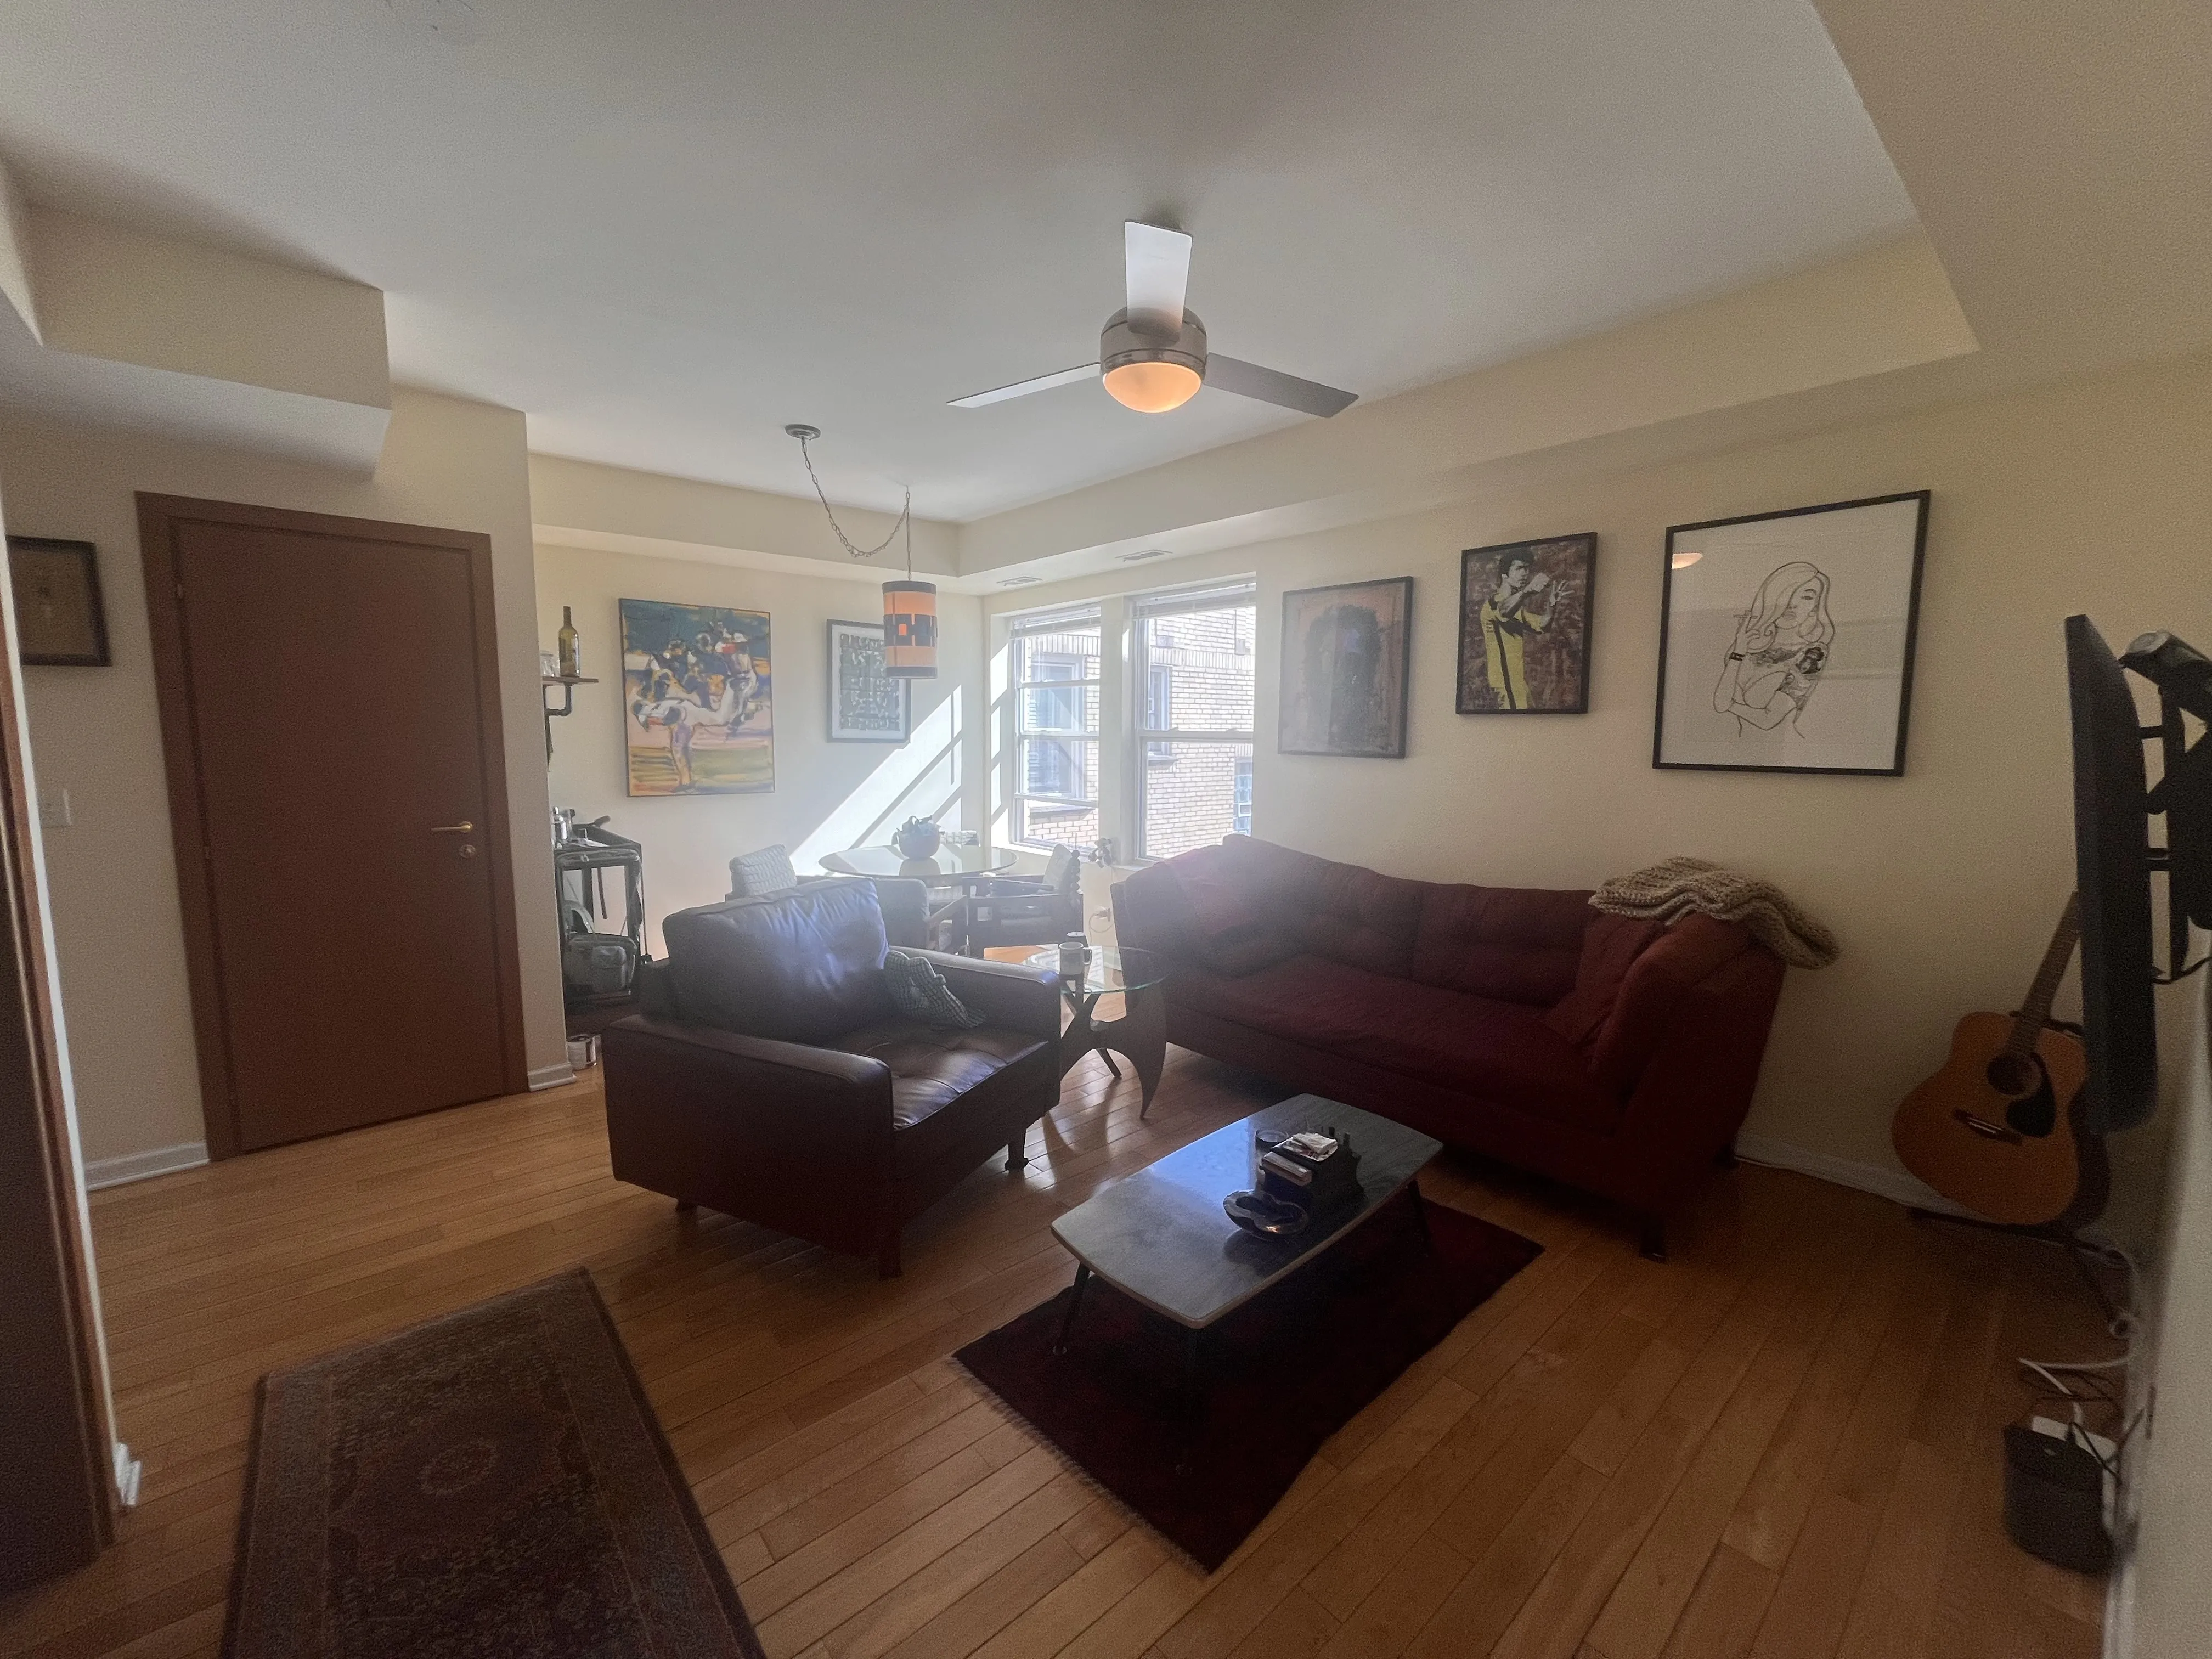 4750 N Albany Ave 60625 60625-unit#3-Chicago-IL